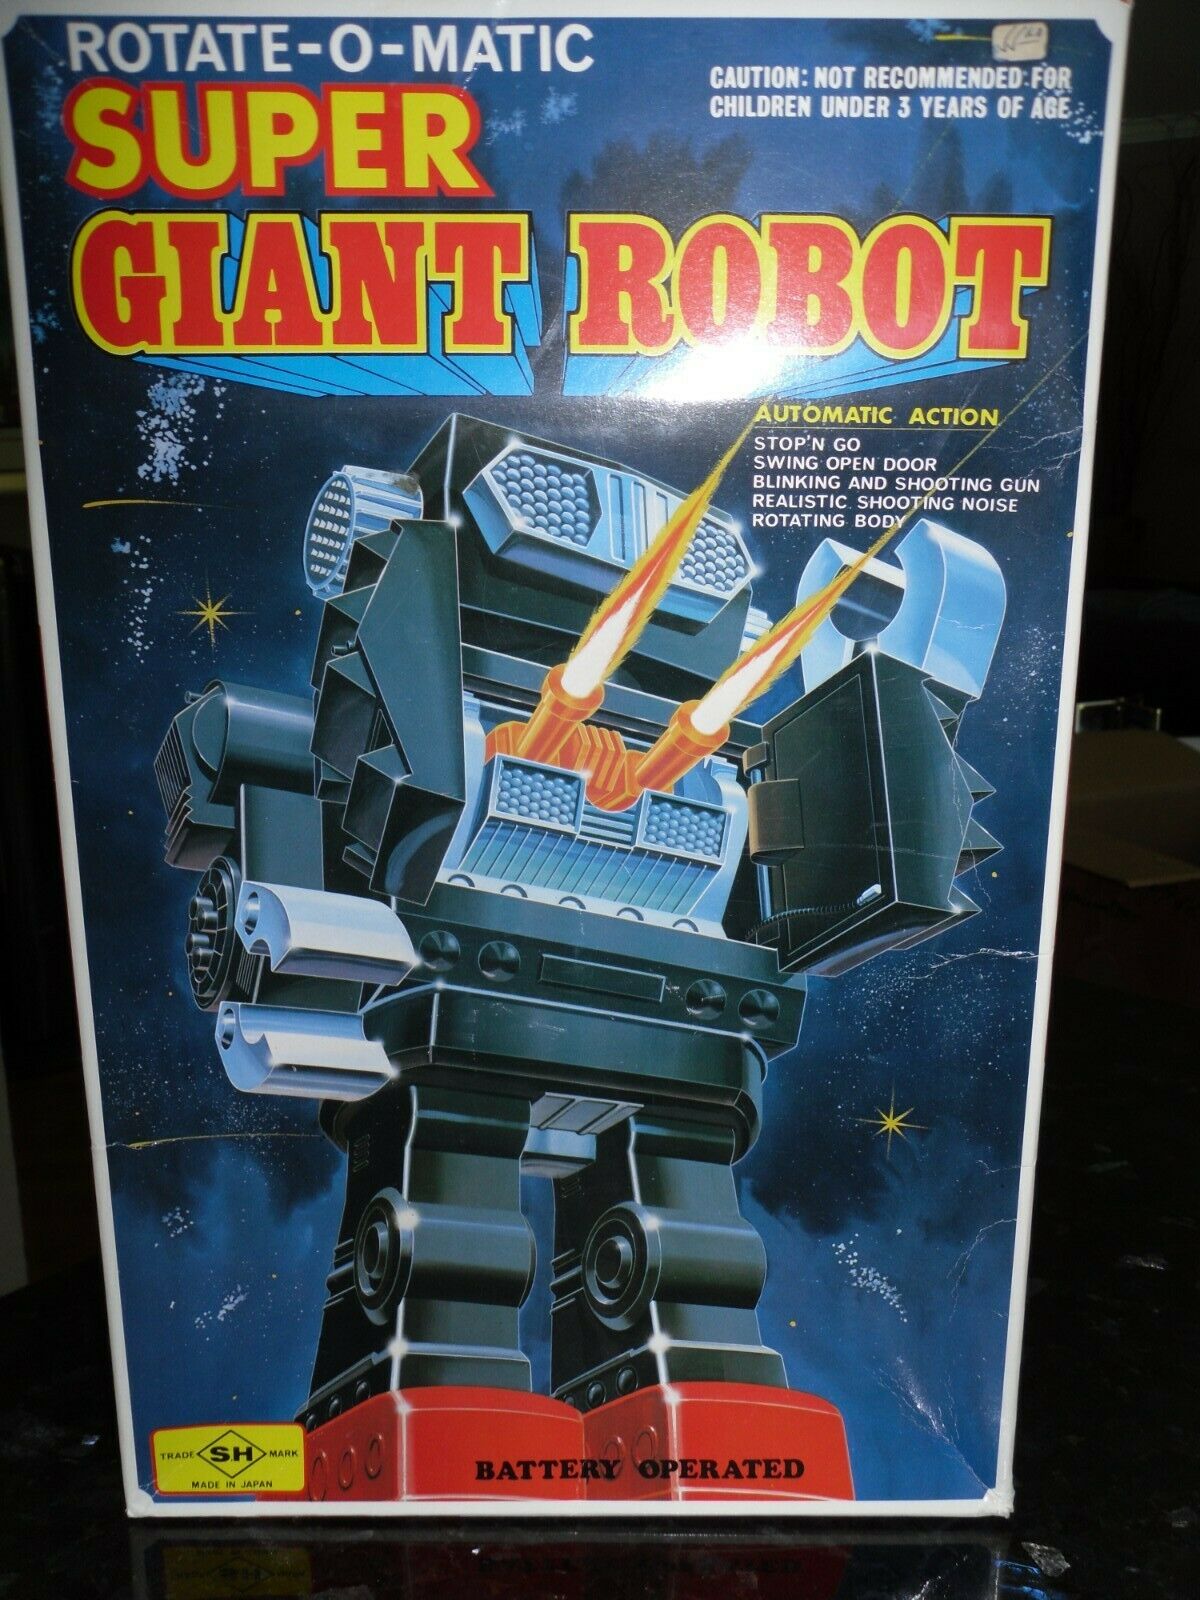 Horikawa Battery Operated Rotate-o-matic Super Giant Tin Robot Toy 16"